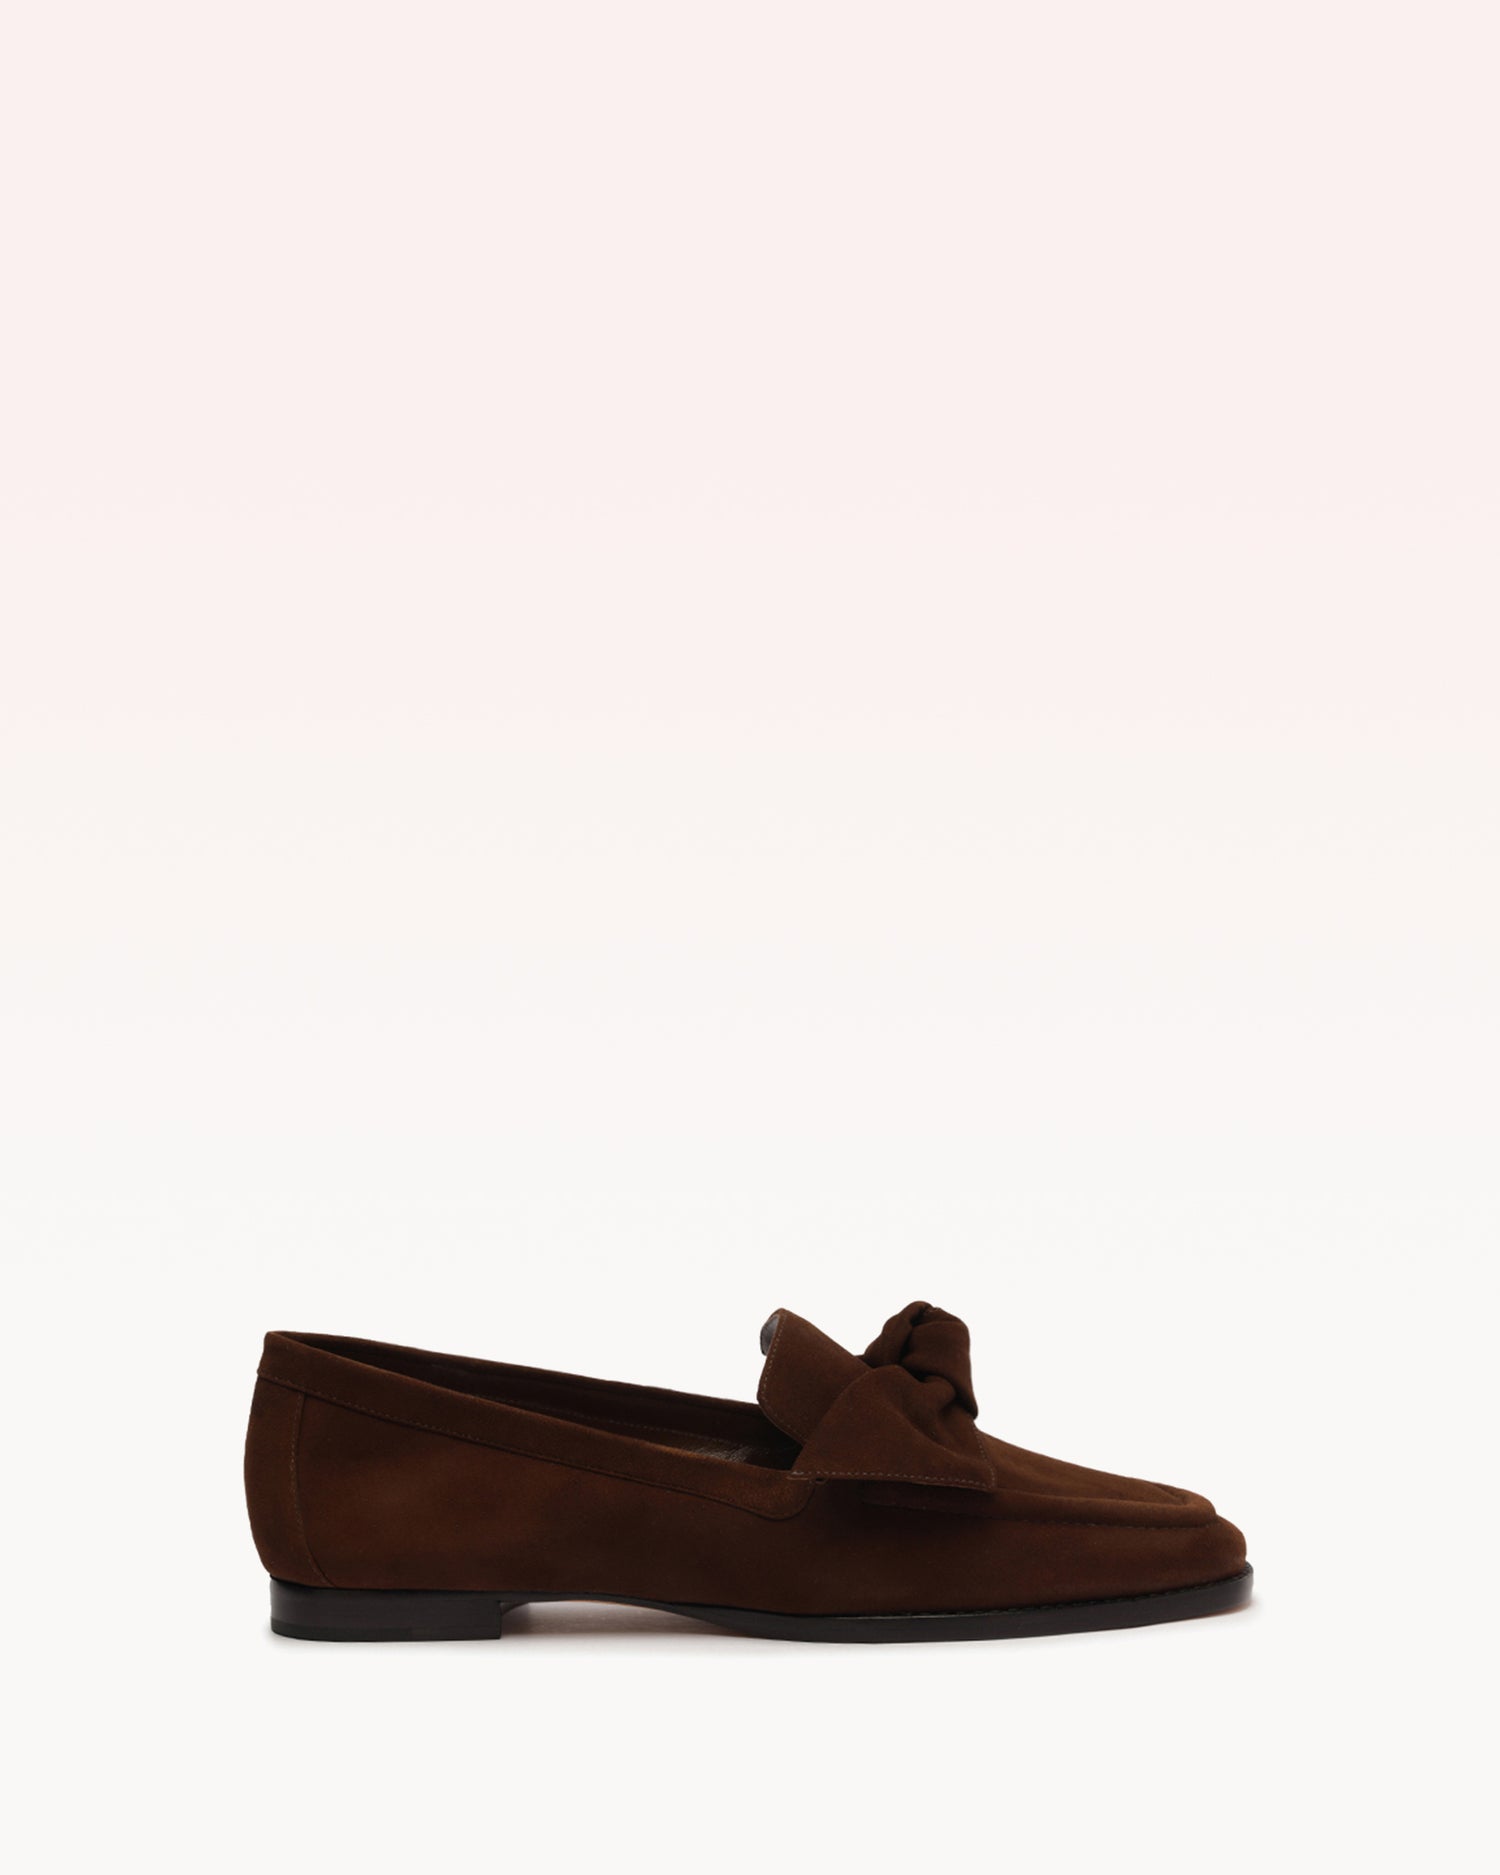 Maxi Clarita Loafer Mousse Loafers S/23 35 Mousse Suede